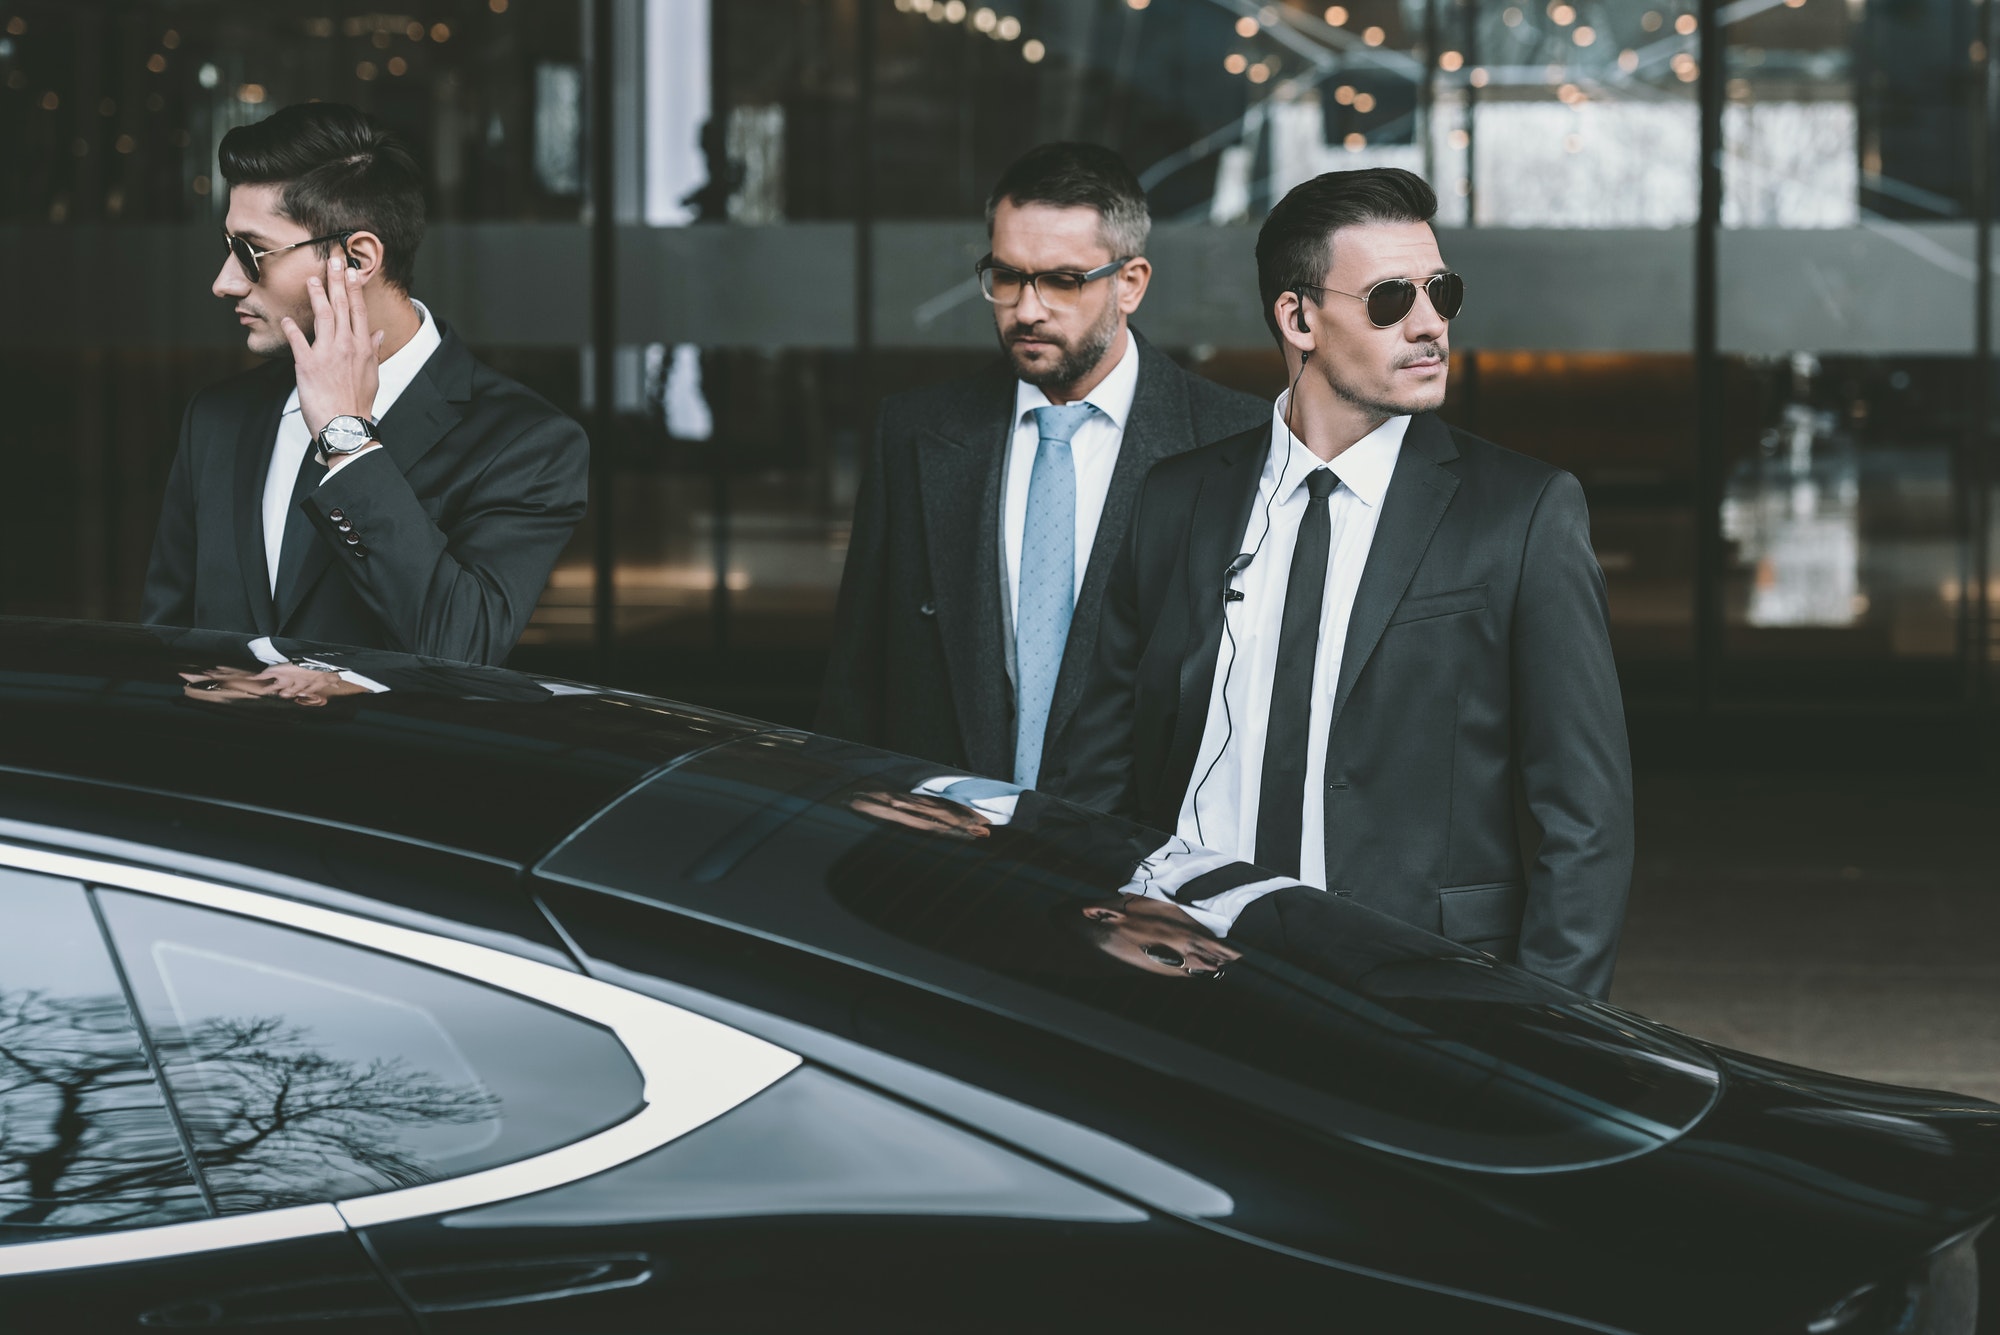 bodyguards going with businessman and reviewing territory near car